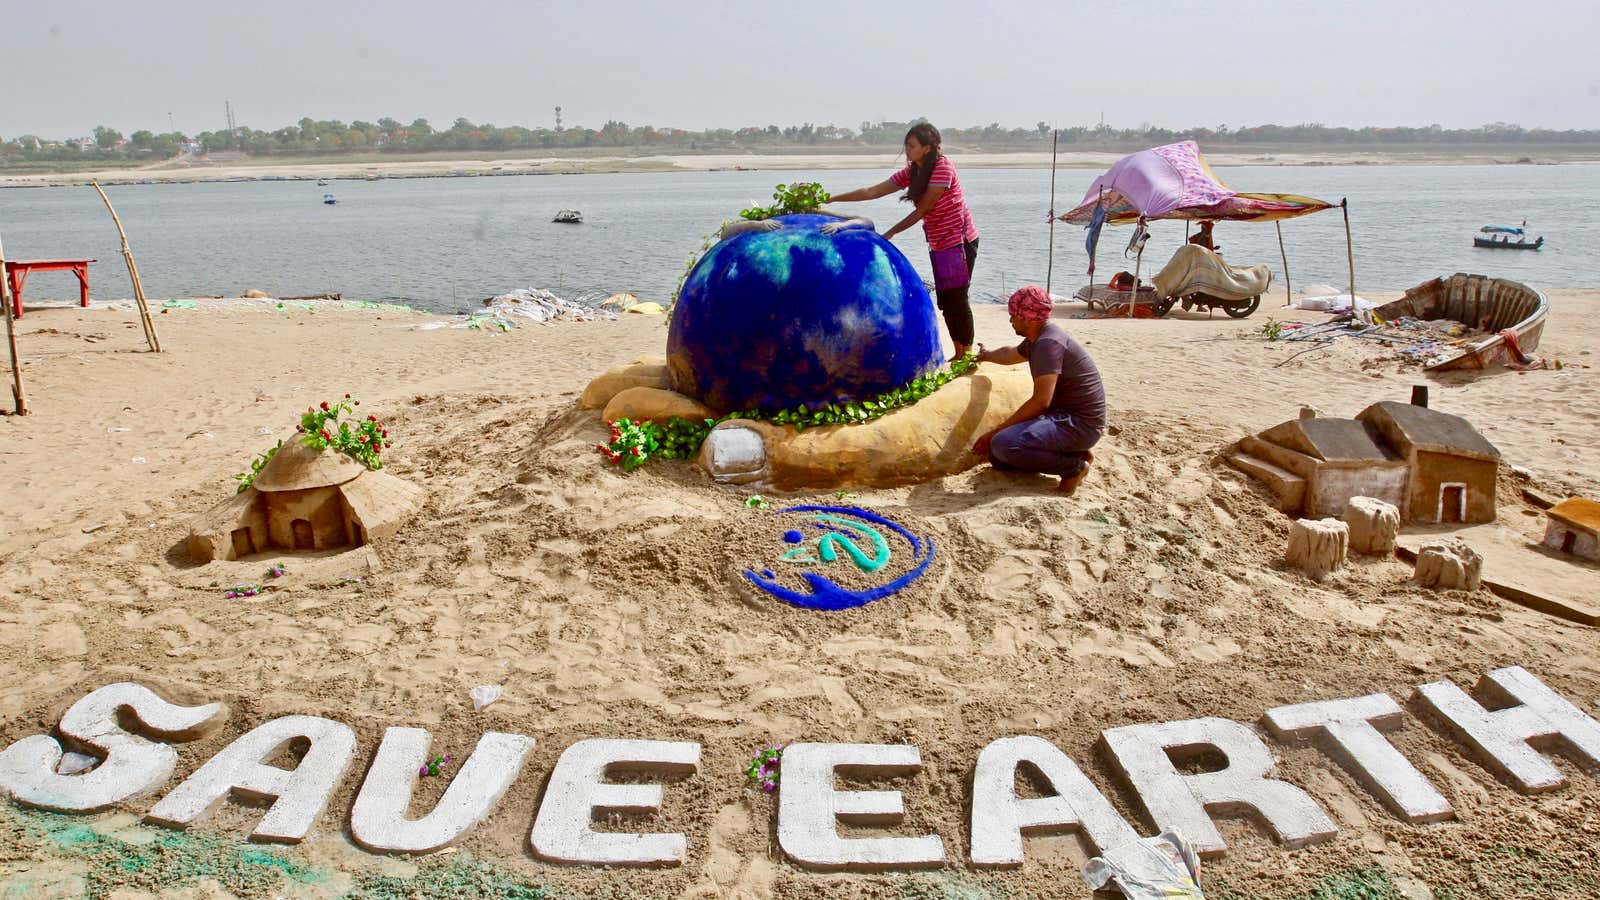 Earth Day 2018 sand sculpture on the banks of the river Yamuna in Allahabad, India.